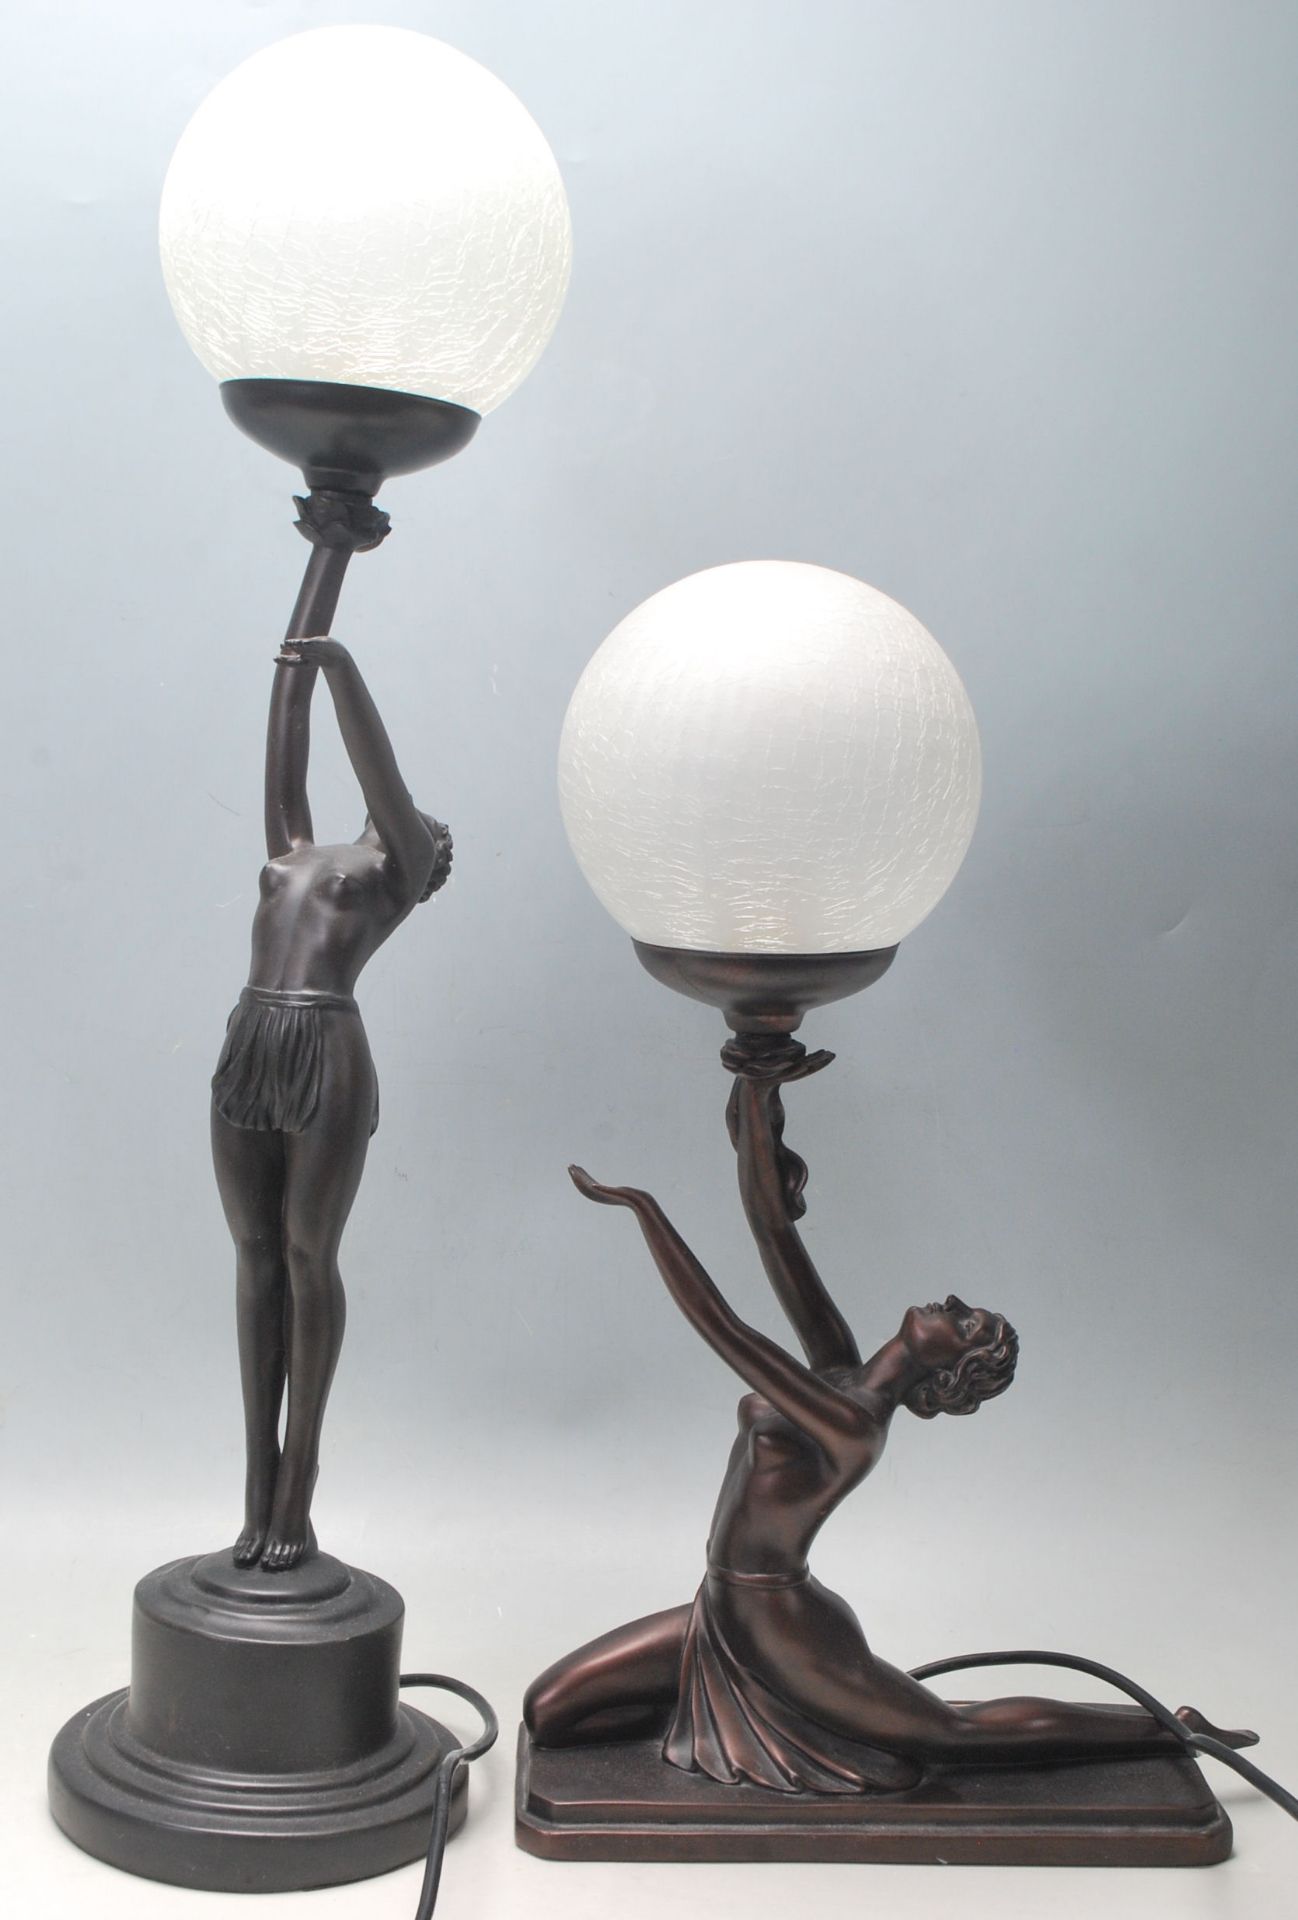 2 ART DECO STYLE BRONZED RESIN TABLE LAMPS